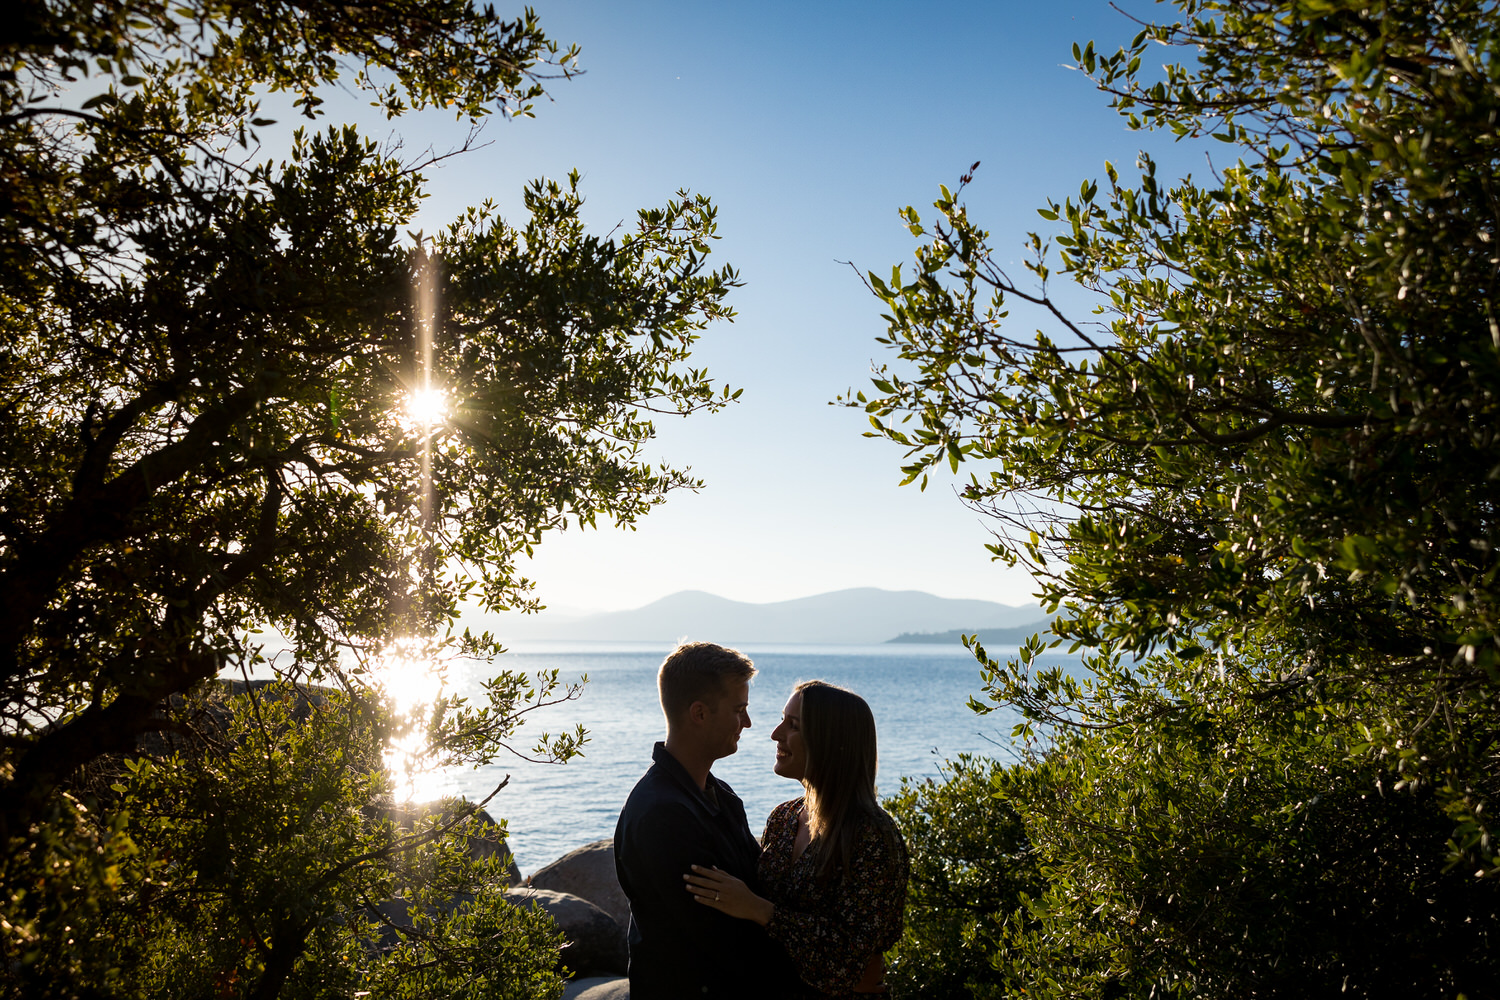 A surprise engagement at a private, scenic location next to Lake Tahoe.